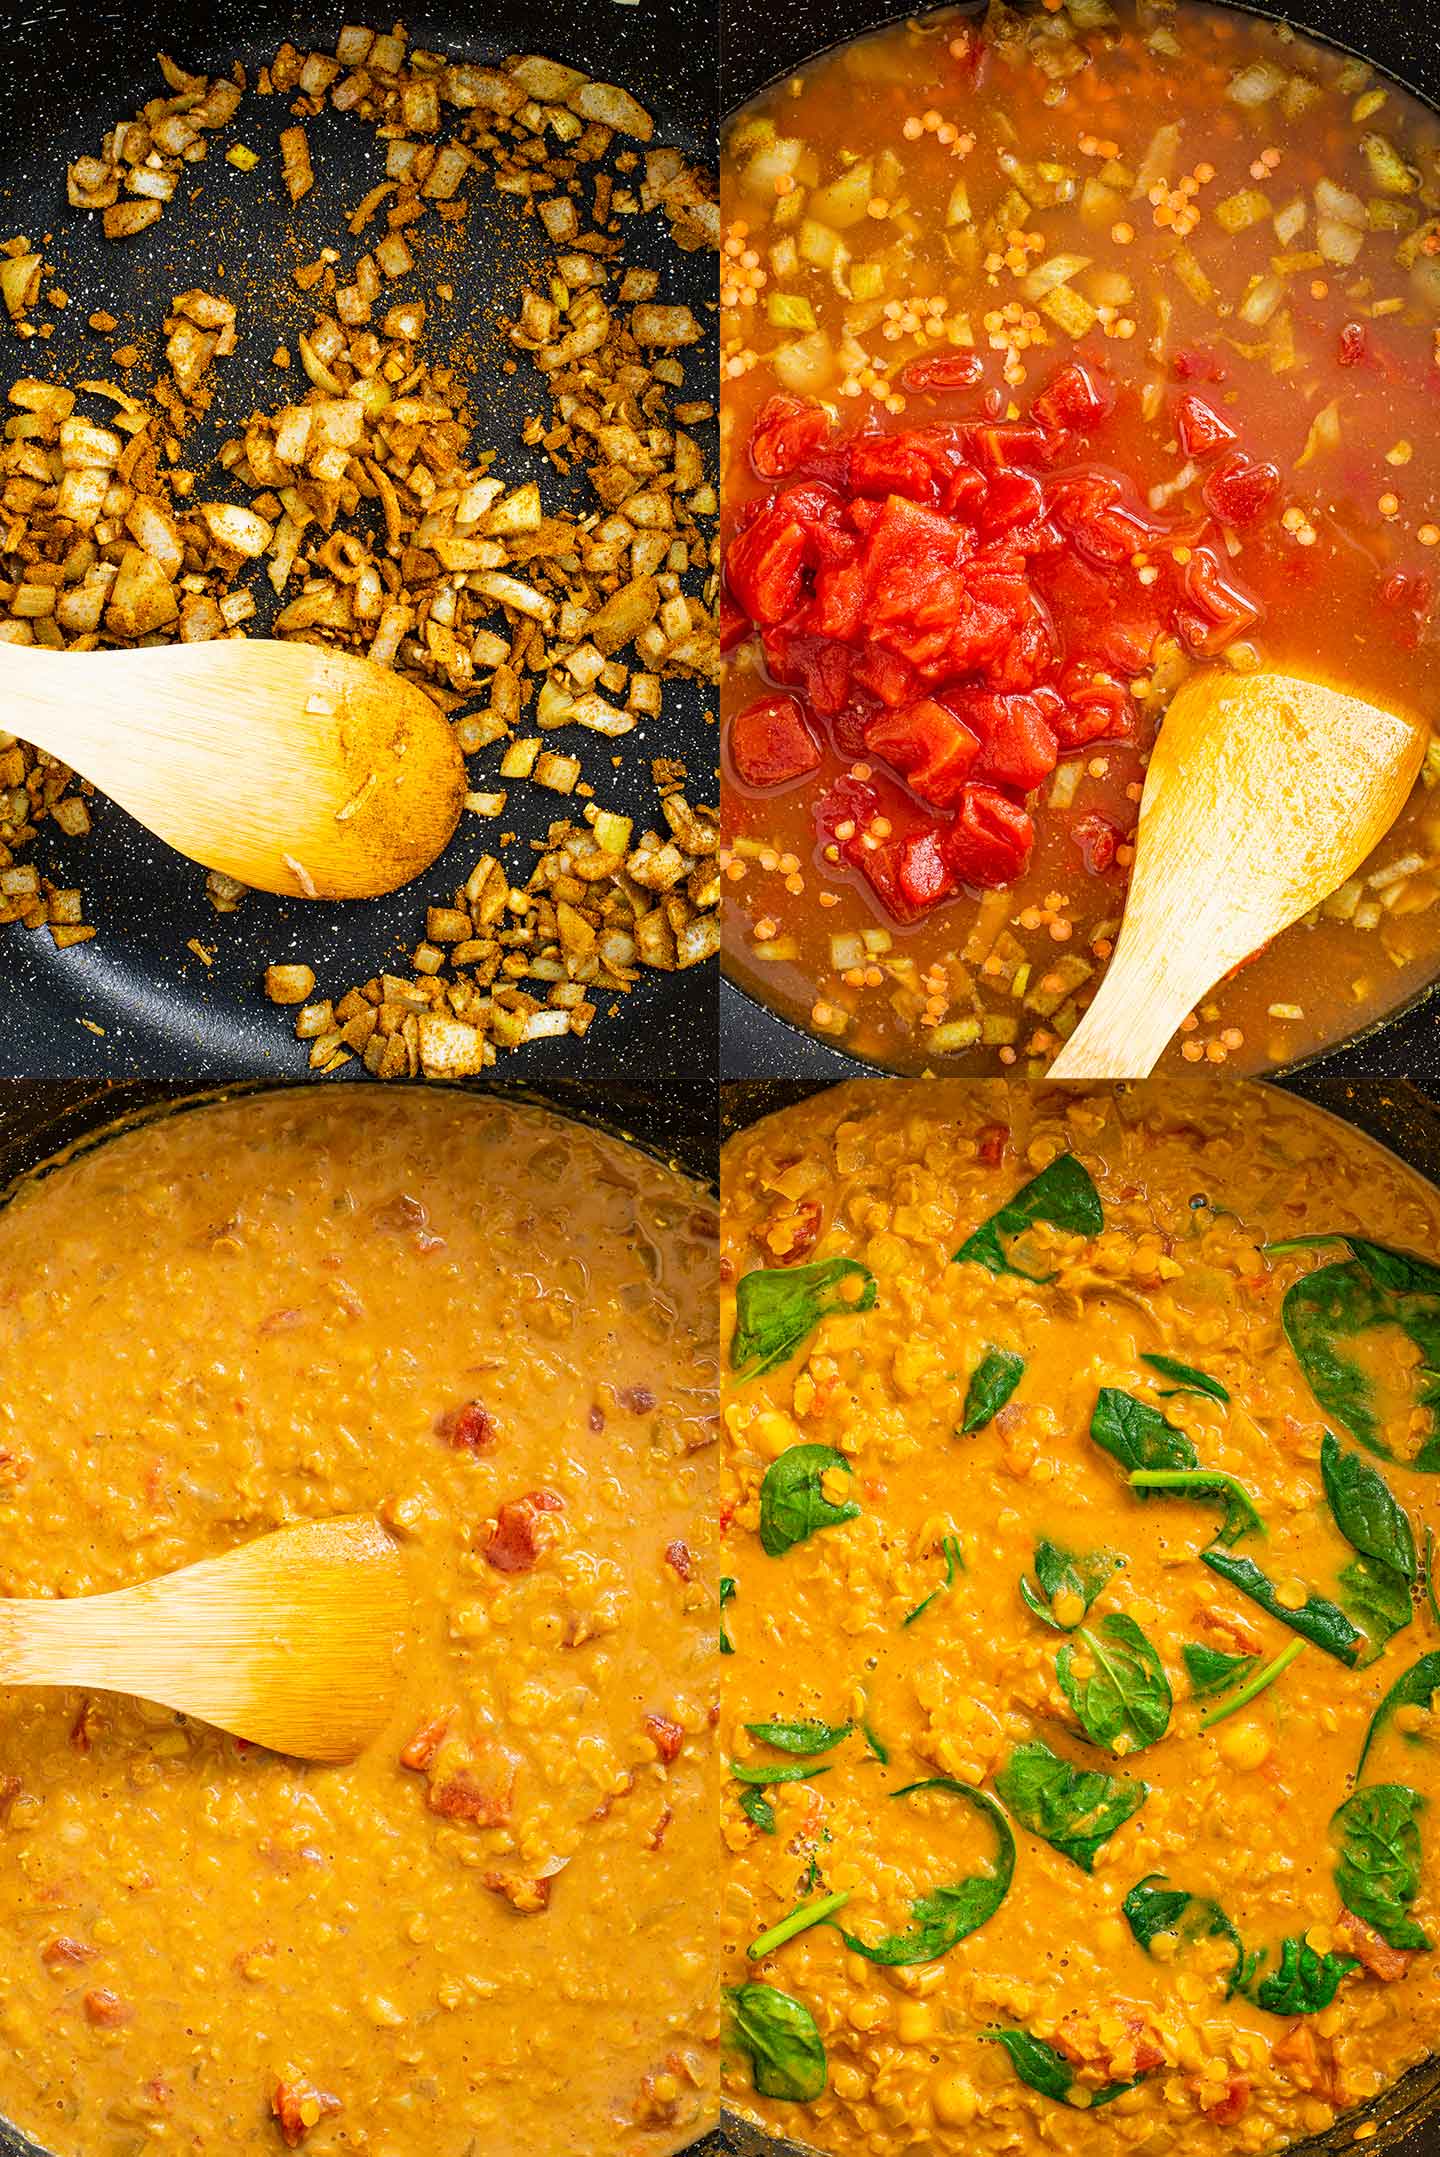 Grid view of four process photos. Onion and garlic are cooked, then more ingredients are added in each photo.